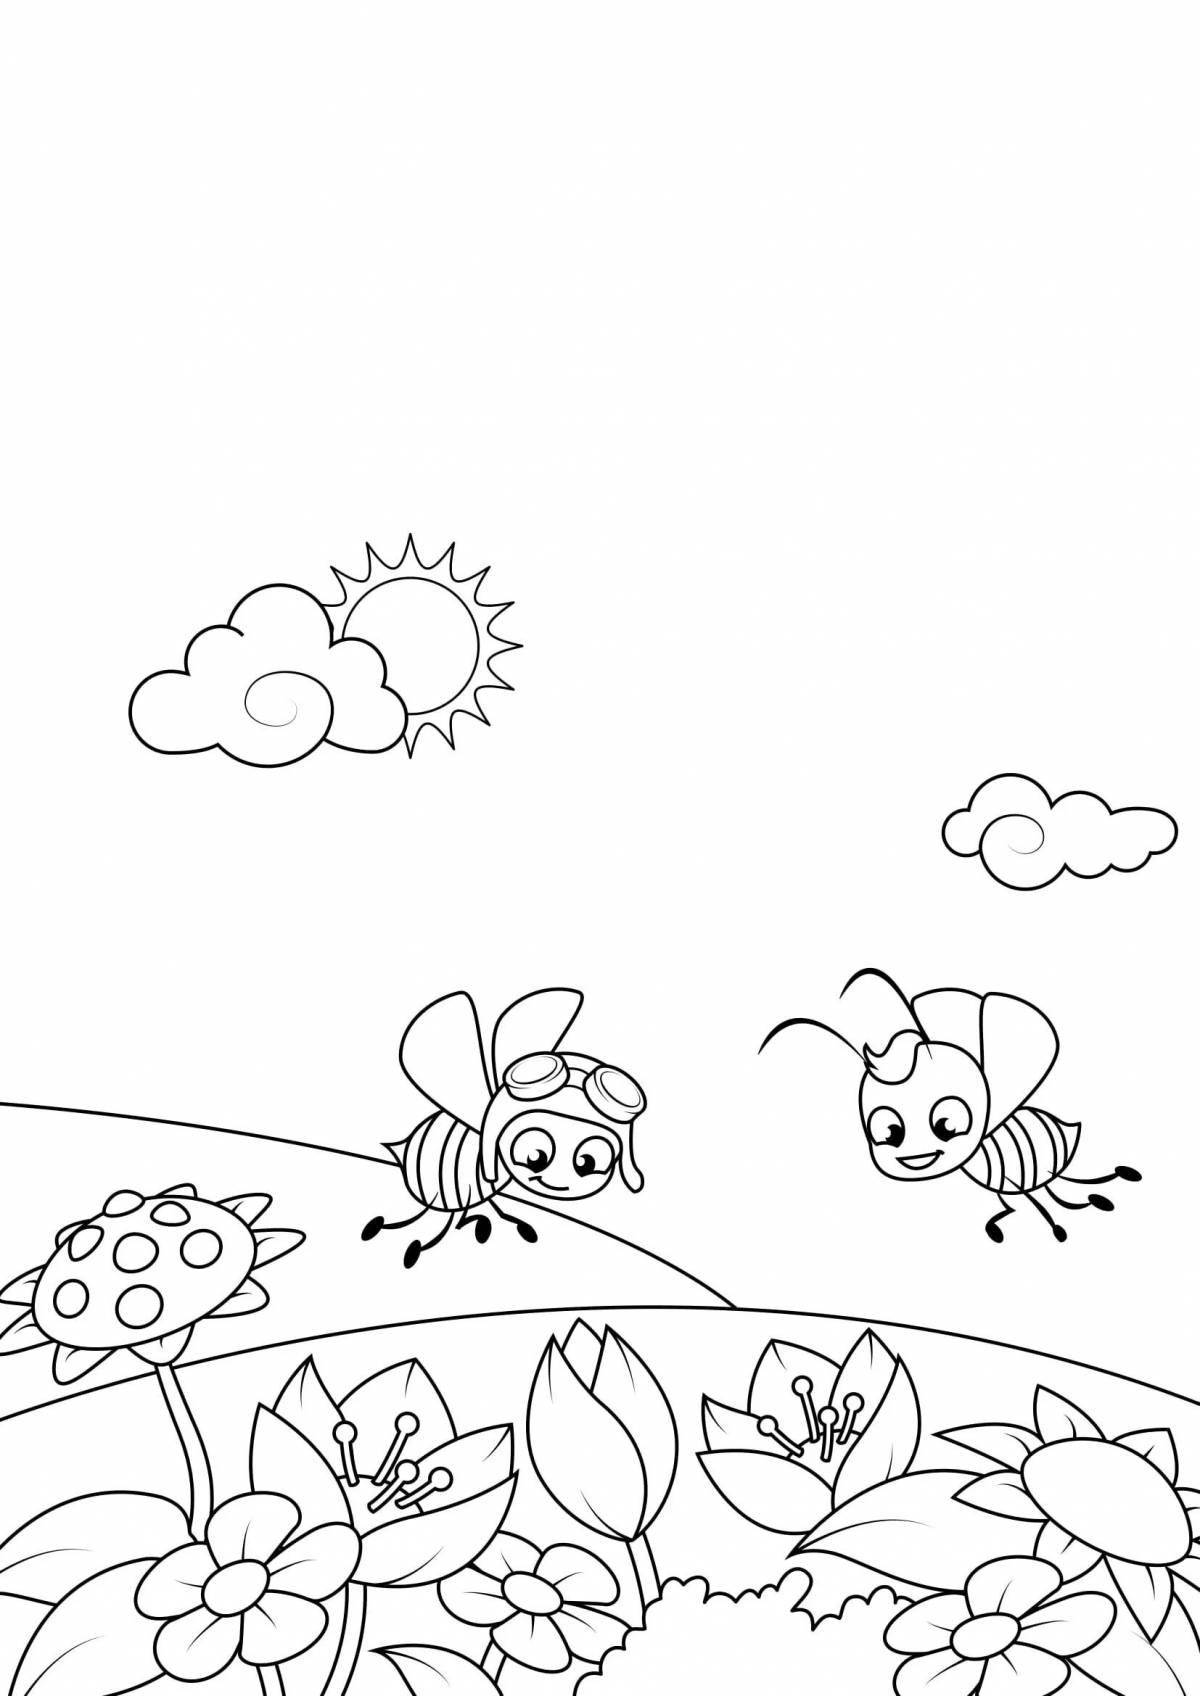 Coloring page rich meadow